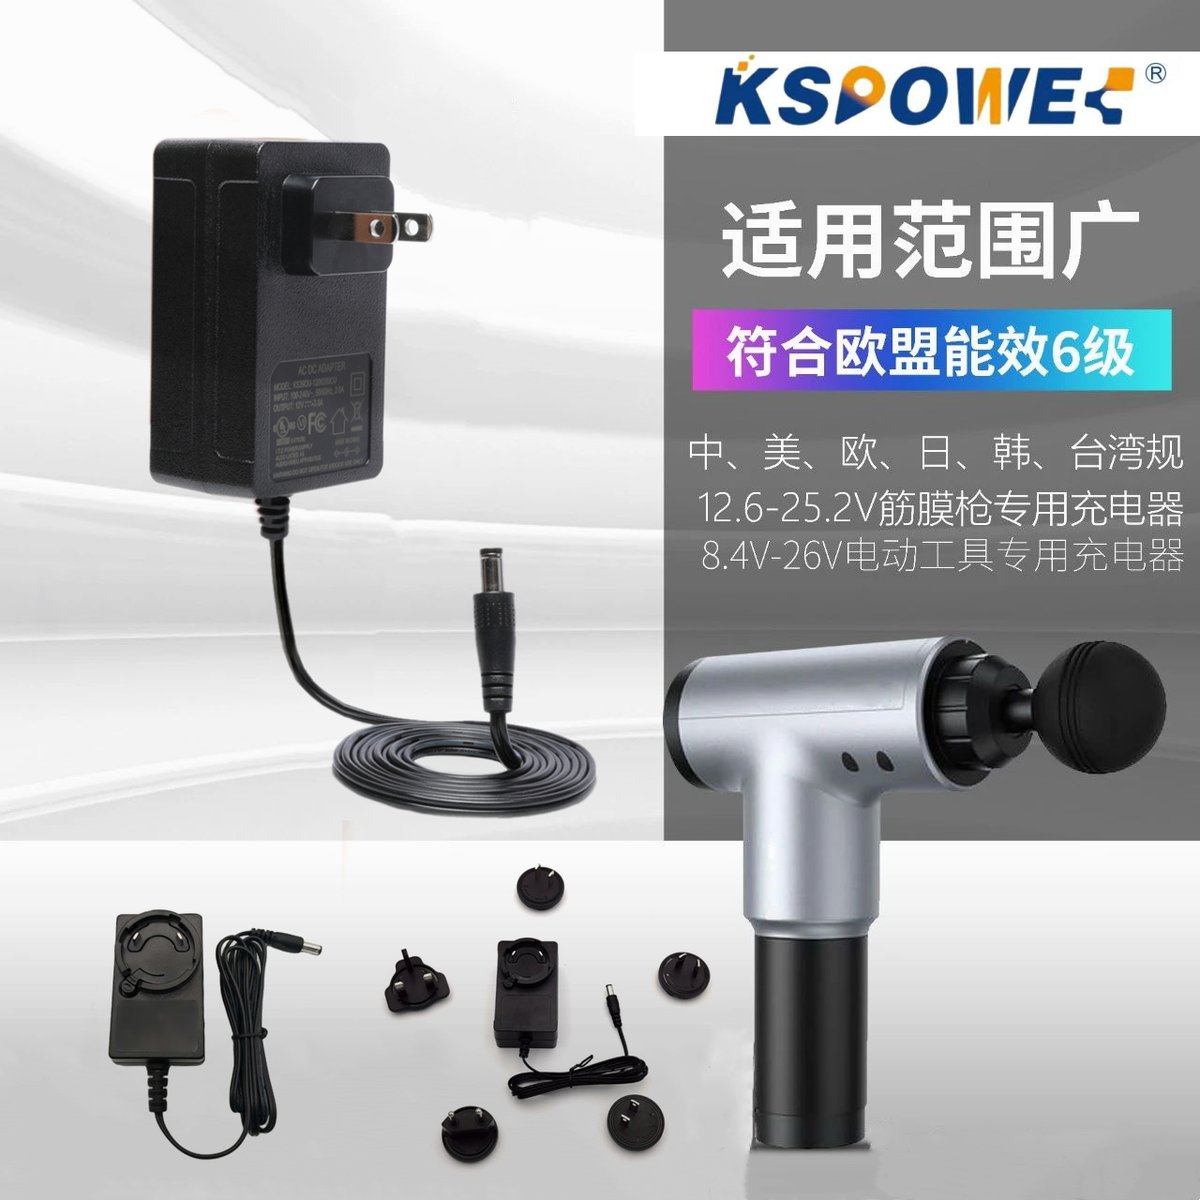 KSPOWER® Power Adapter / Battery Charger for massage gun, Muscle Massage Gun, Vibration Muscle Massage Gun
#poweradapter #poweradaptor #acdcadapter #powersupply #batterycharger #massagegun #musclemassagegun #hyperice #hypervolt #shenzhen #chargerfactory #OEM #ODM #wallcharger